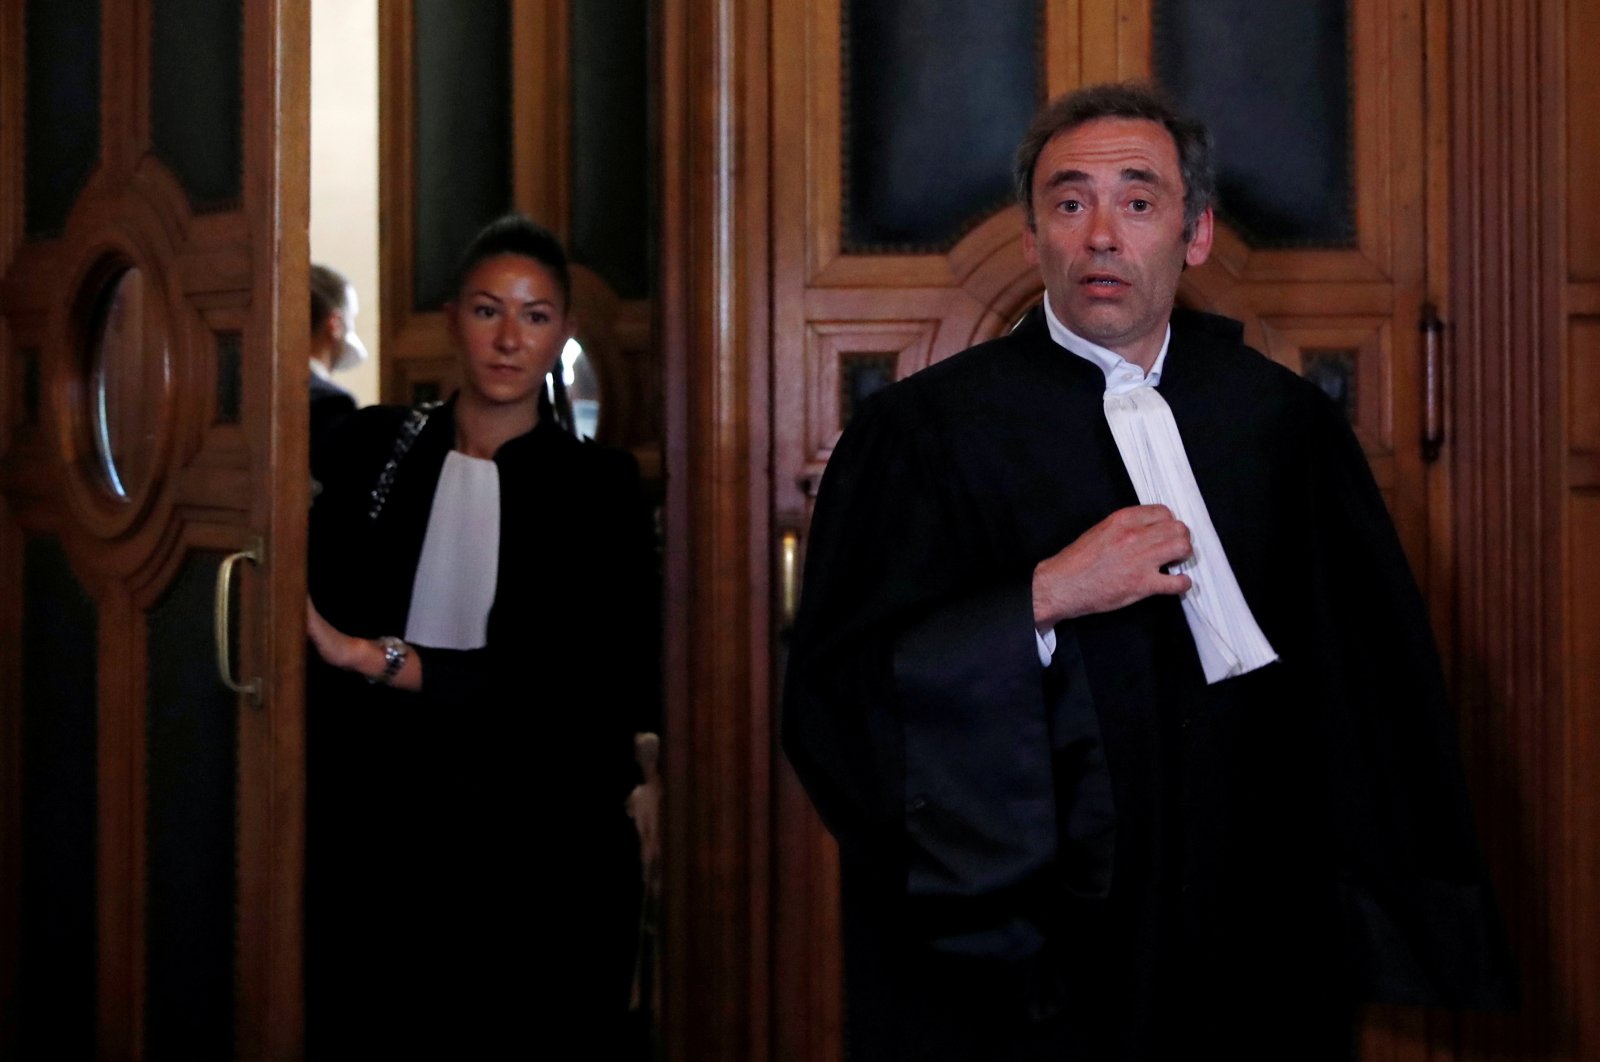 French lawyer Laurent Bayon, who defends Rwandan genocide suspect Felicien Kabuga, leaves the courtroom after the initial extradition hearing for Felicien Kabuga at the Paris courthouse, France, May 20, 2020. (Reuters Photo)